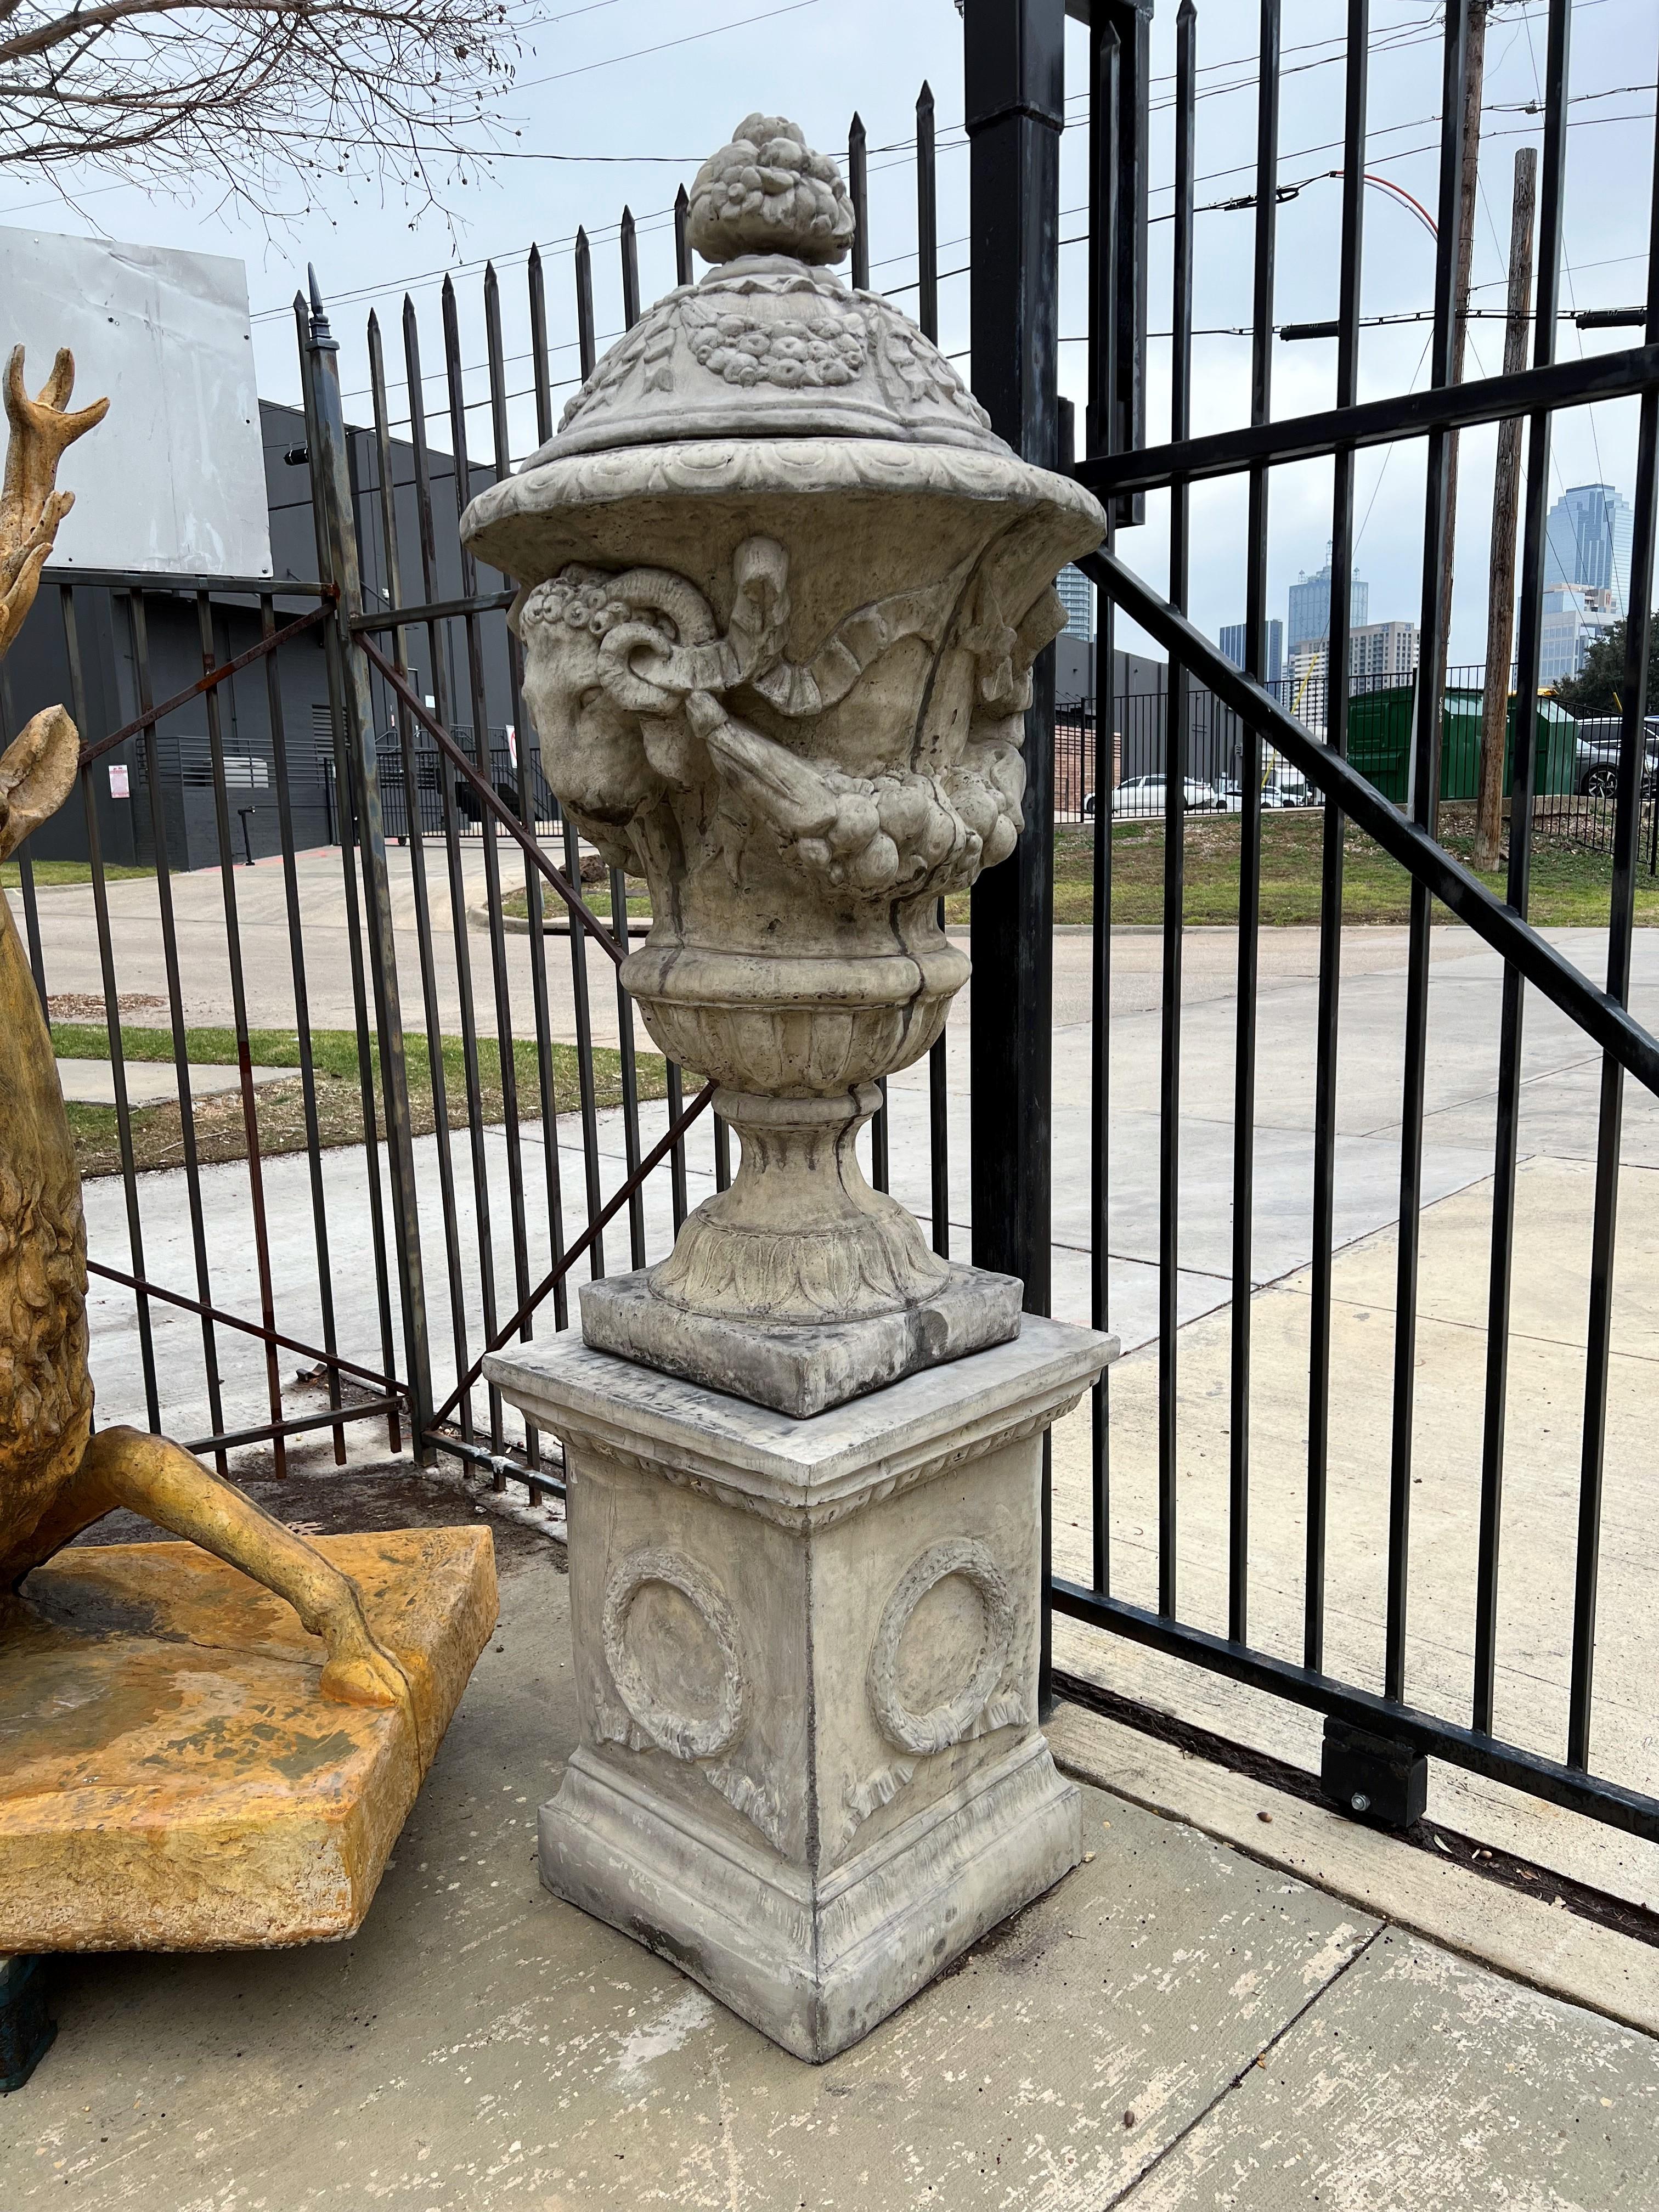 This tall pair of French garden urns measures 83 ½” tall (the pedestals are 28 7/8”, making the urns themselves 54 5/8”). They are very detailed renditions of antique originals that were carved from marble or stone. Since these are cast with a